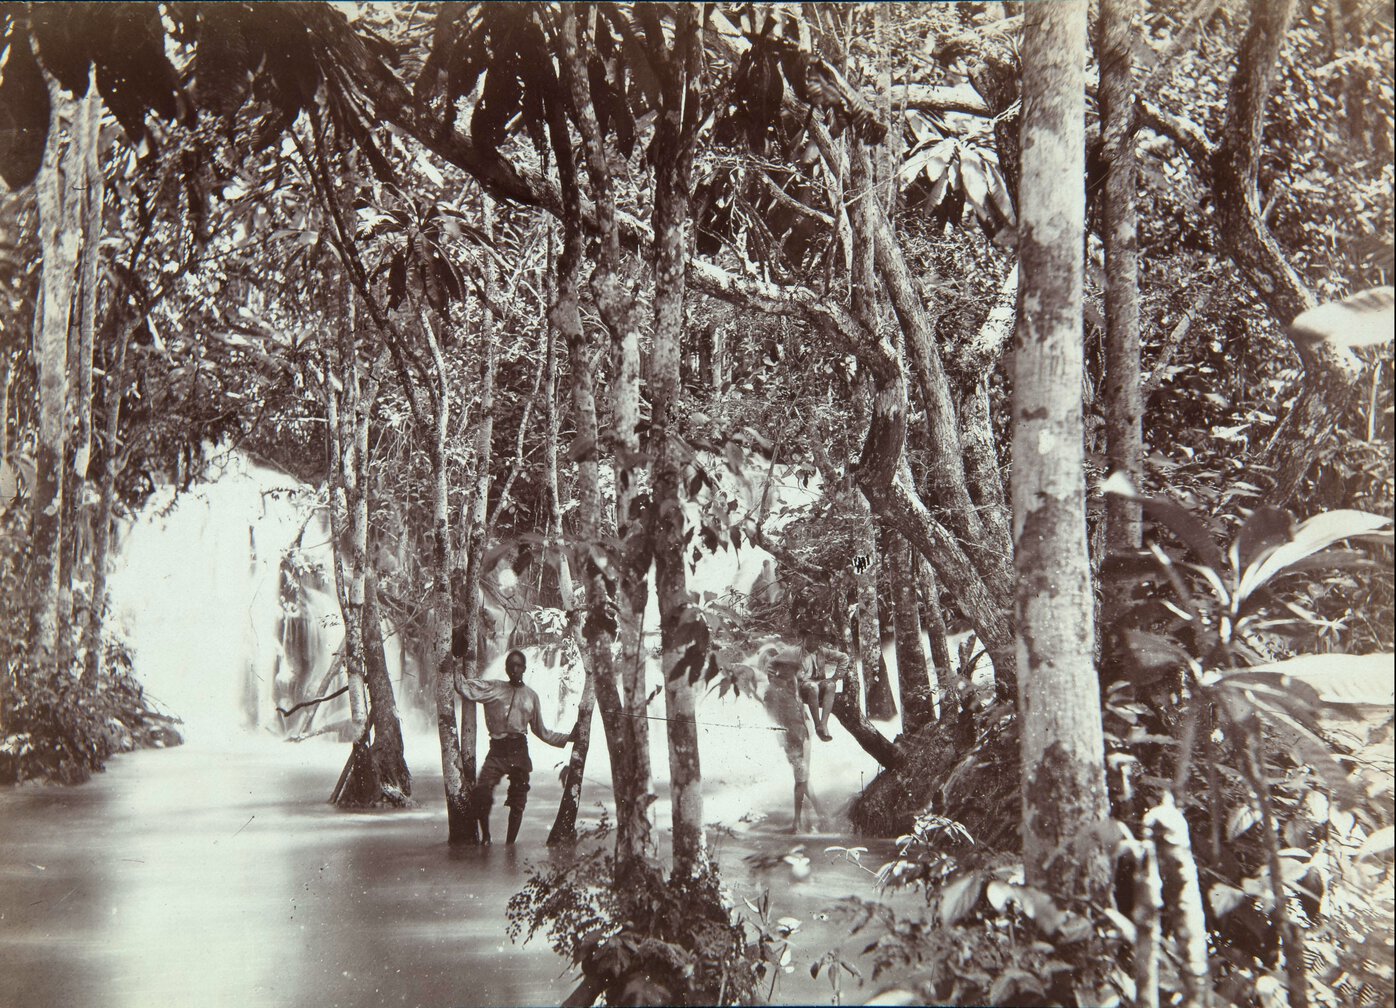 Three people in a swamp with tall trees; two of the people stand in the water; one sits on a branch.